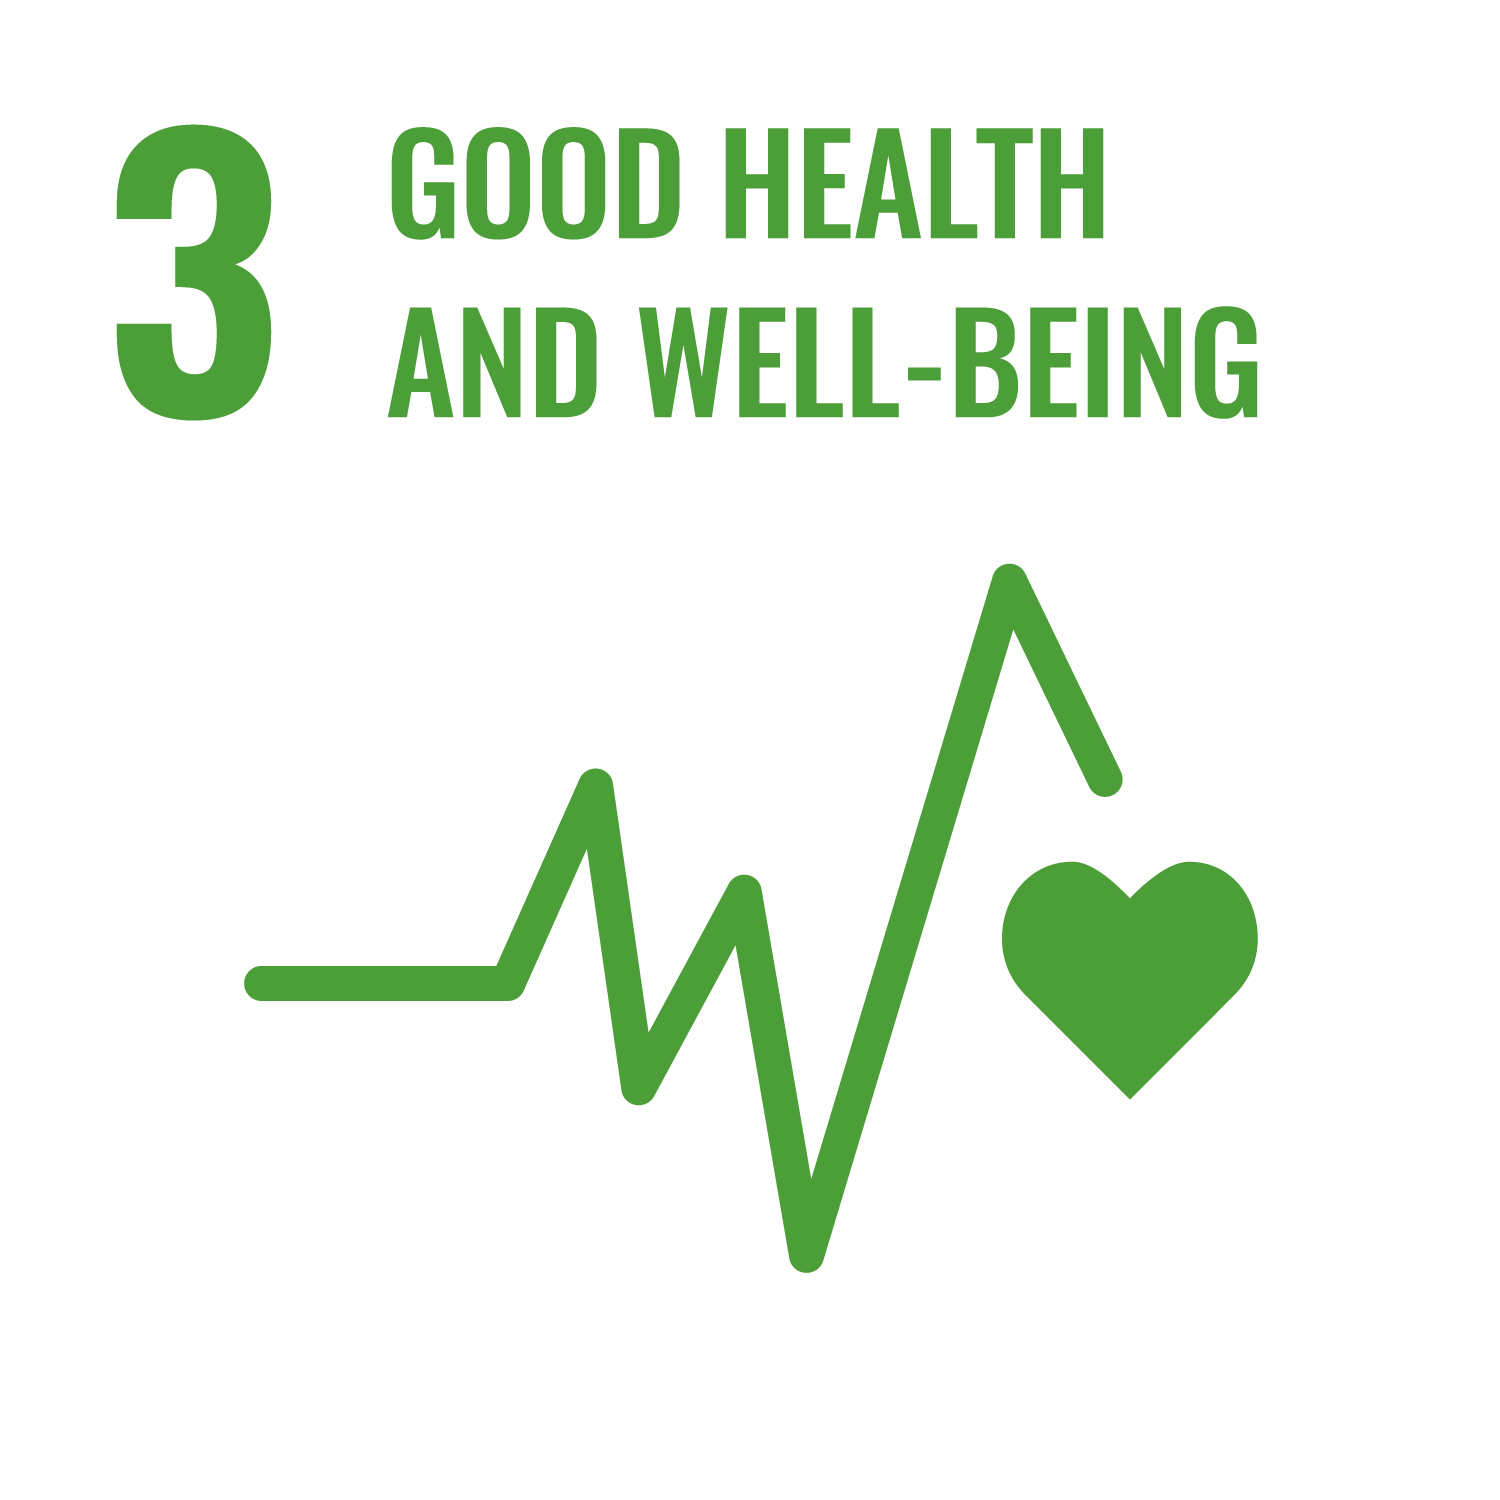 3 Health and well-being